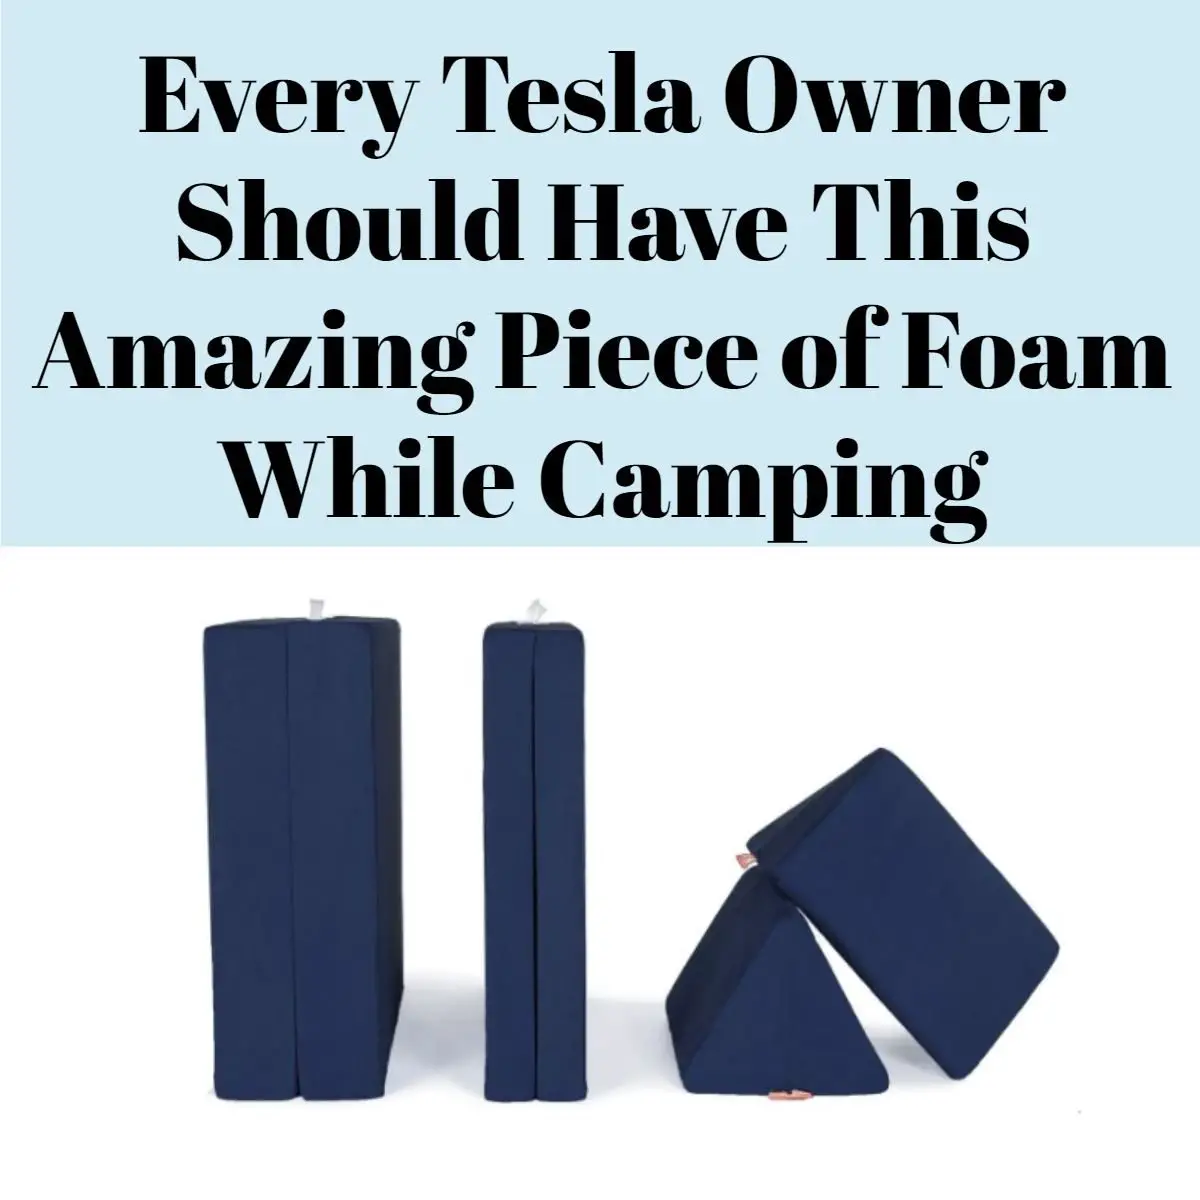 Every Tesla Owner Should Have This Amazing Piece of Foam While Camping